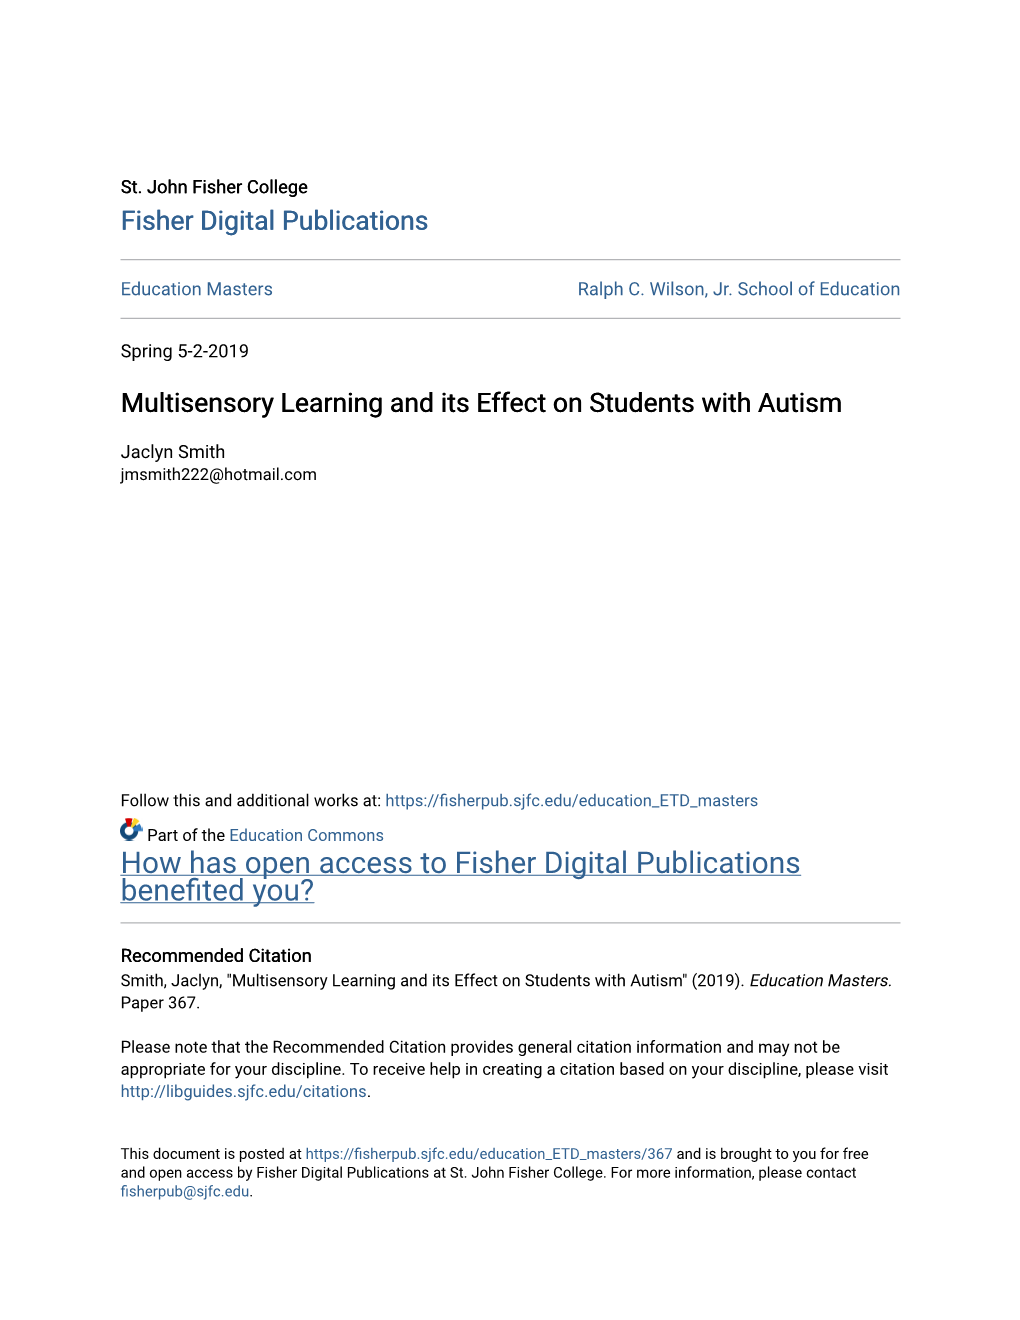 Multisensory Learning and Its Effect on Students with Autism